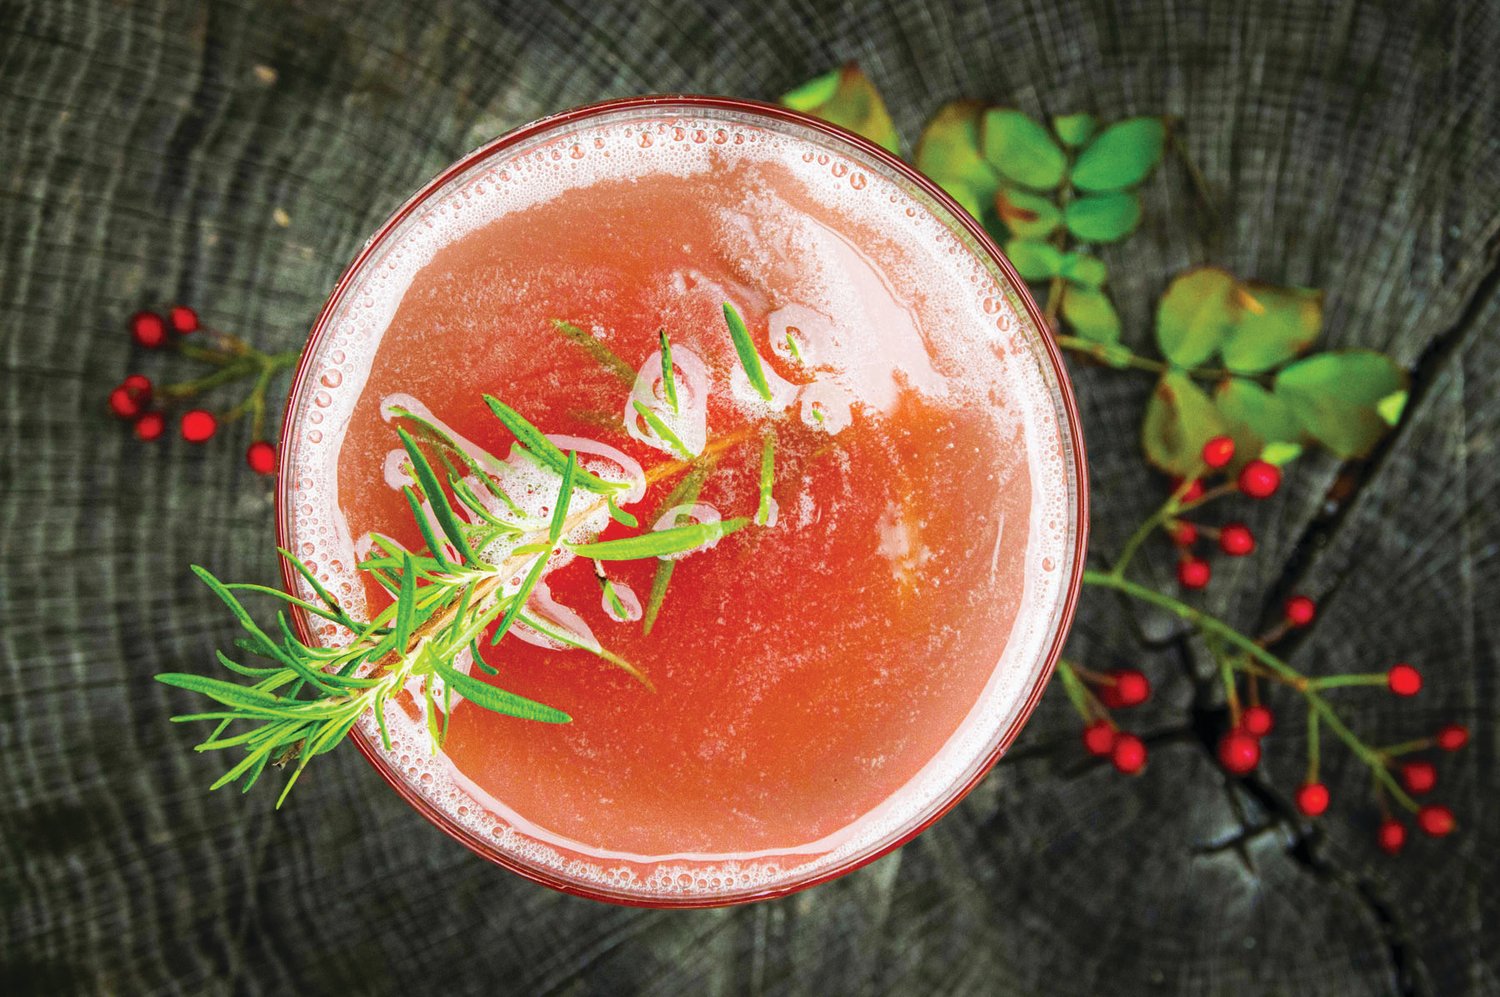 Create your own specialty cocktail, like this Rosehip Blush, each week during The Art of Ecology’s “Autumn Trails-to-Tasting Video Series.”